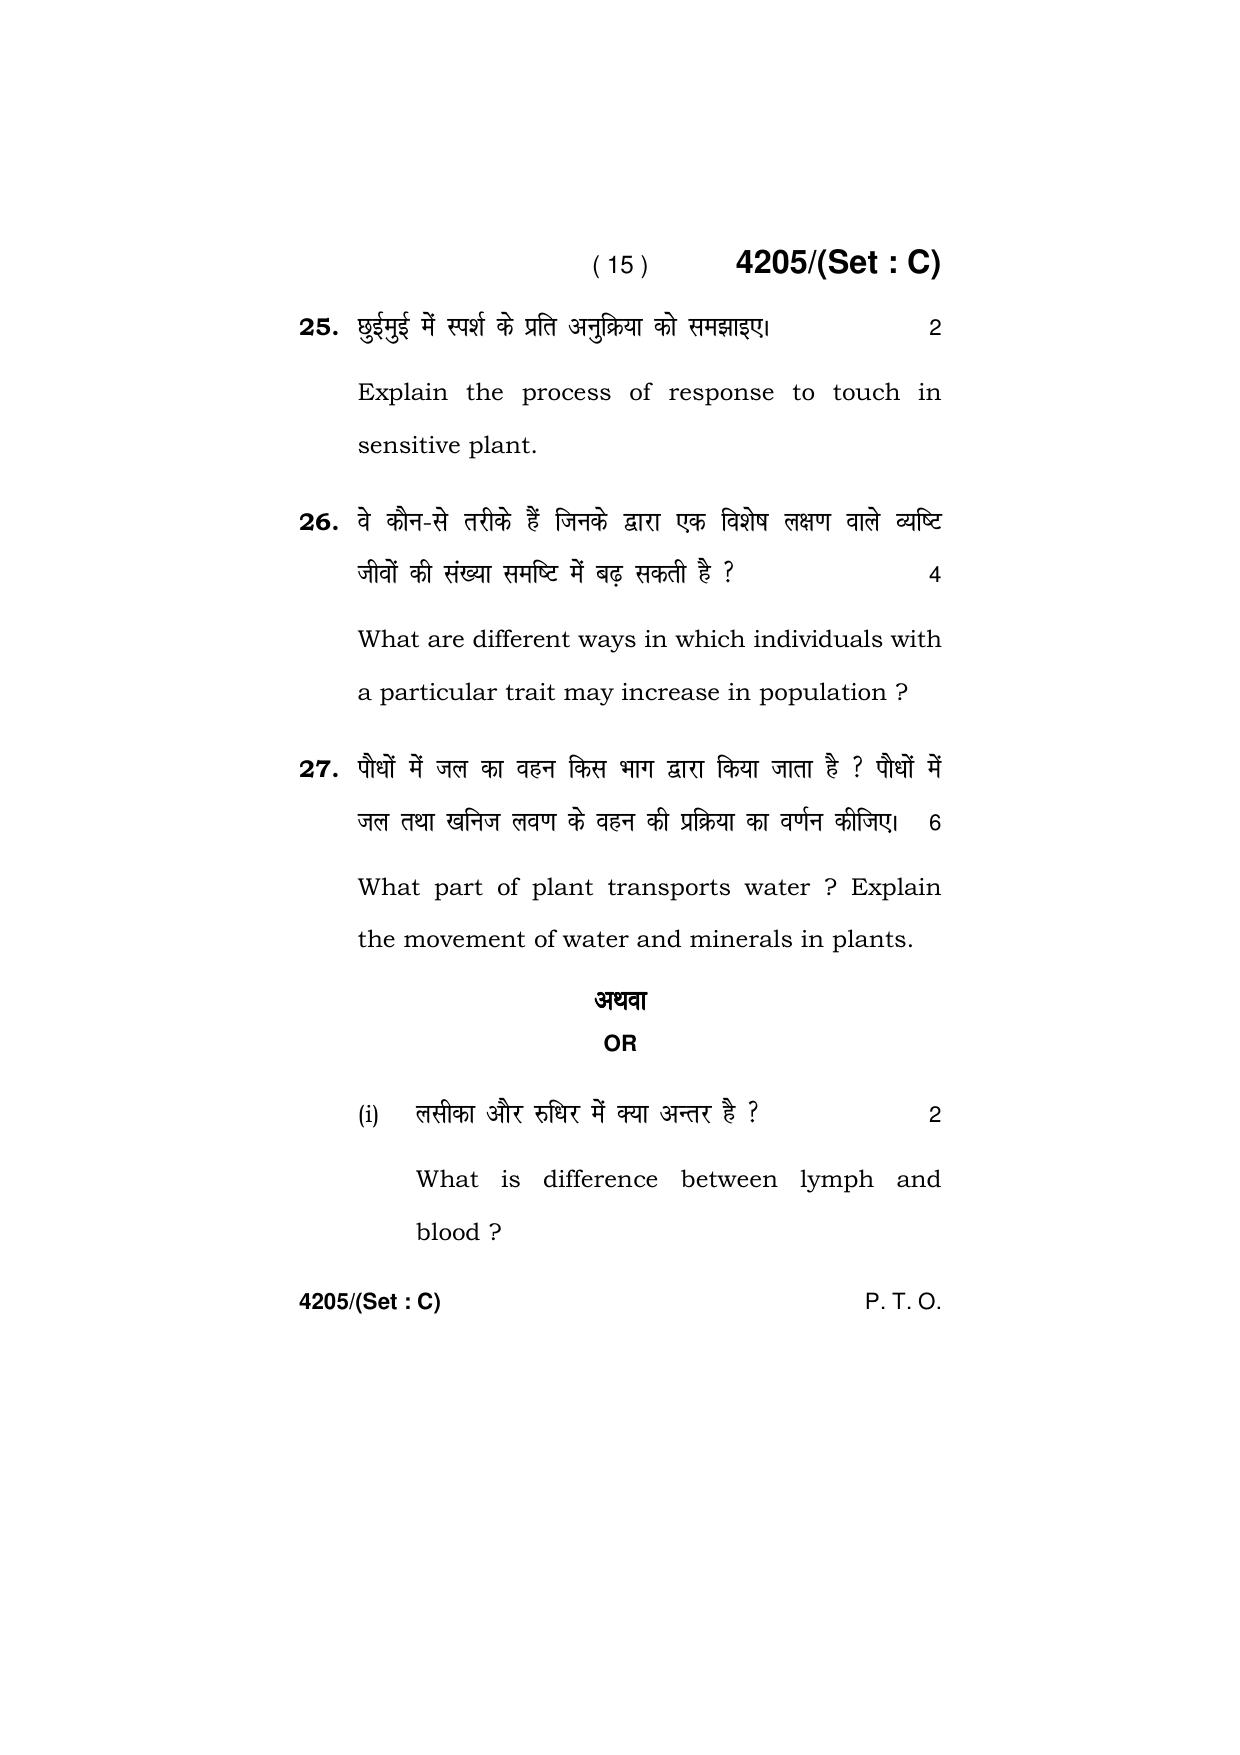 Haryana Board HBSE Class 10 Science (All Set) 2019 Question Paper - Page 47